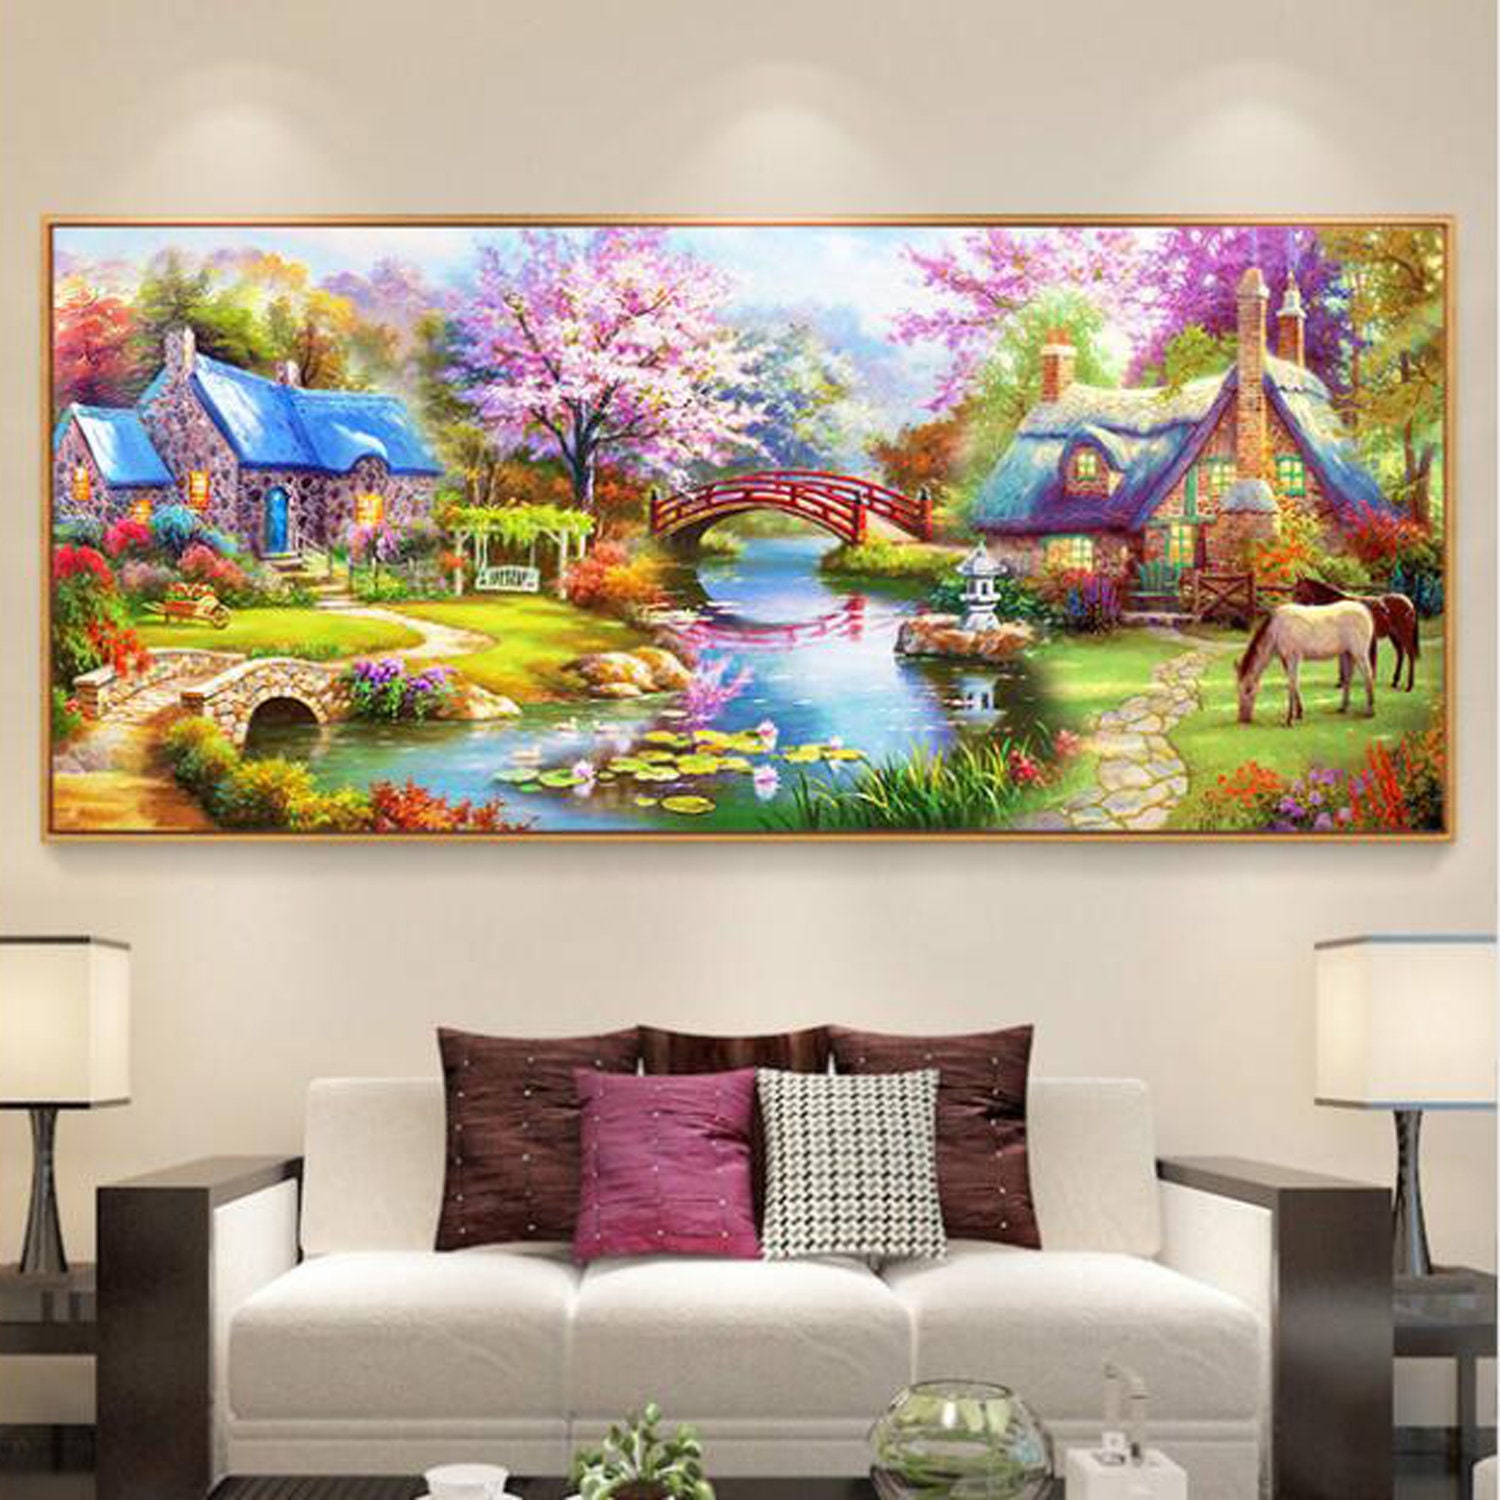 Full Square Drill 5D DIY Diamond Painting Colorful Flower Embroidery Mosaic New 